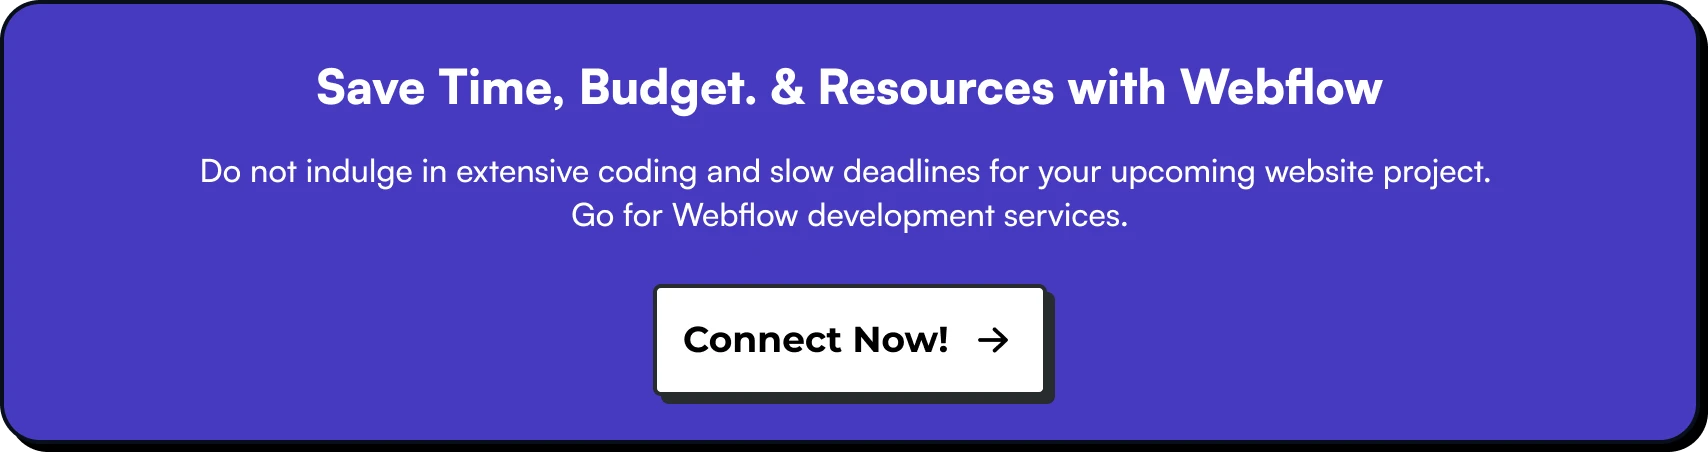 Save Time, Budget and Resources with Webflow Development Services by SolGuruz